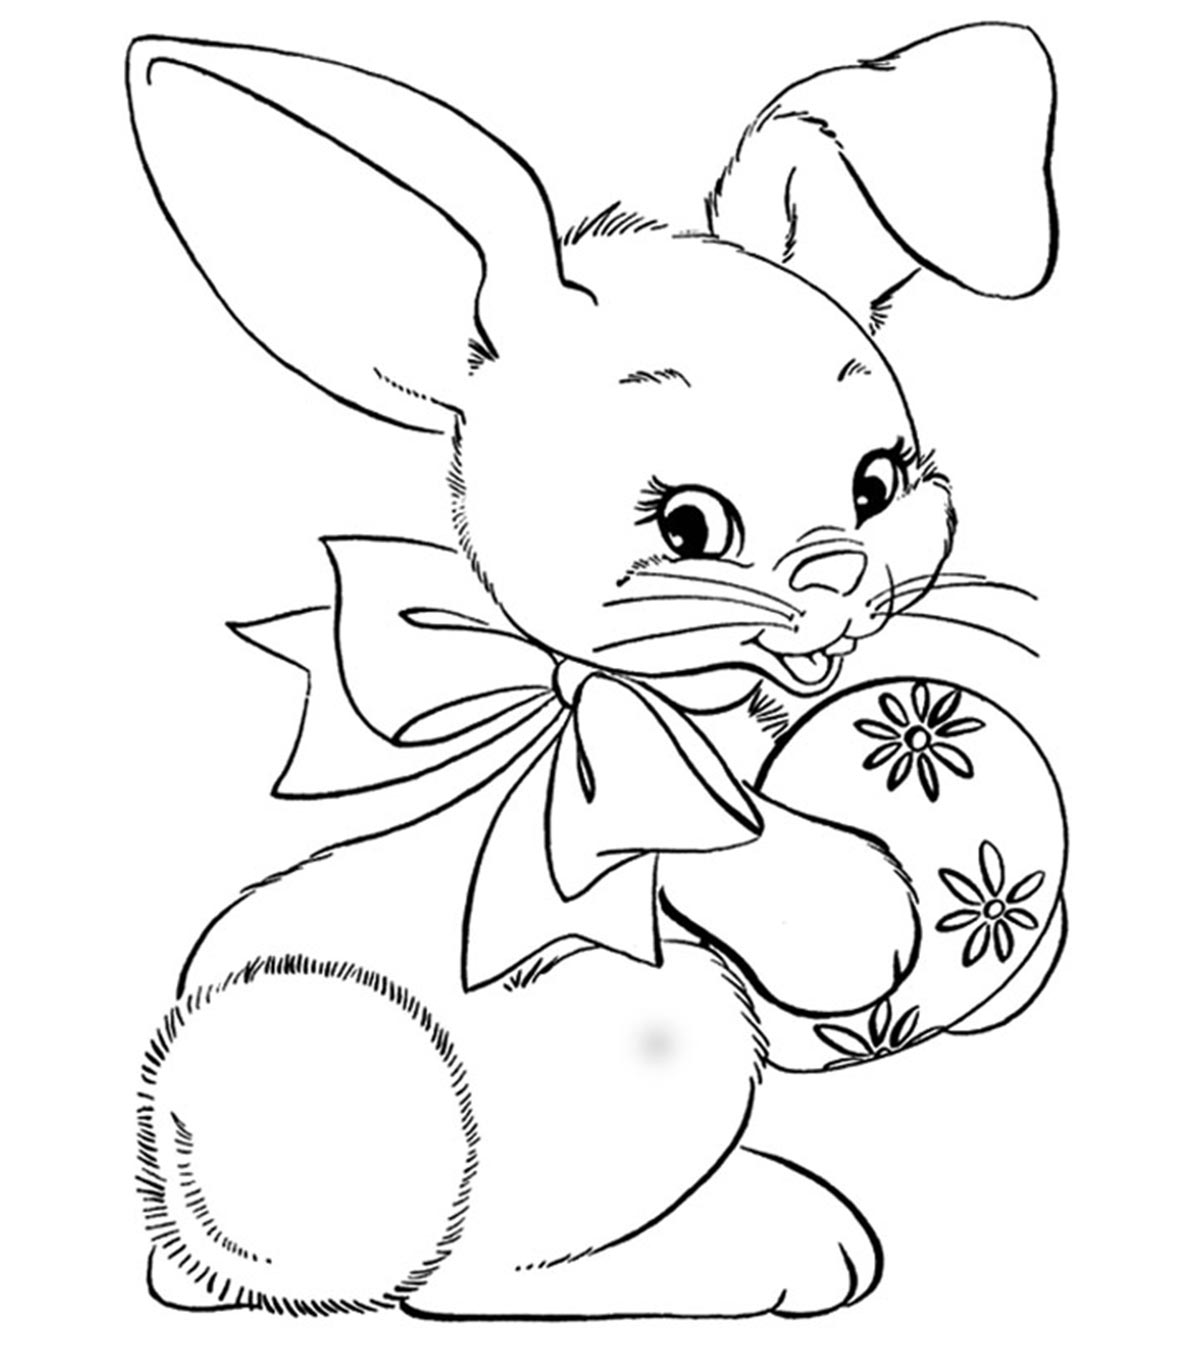 15 Best Easter Bunny Coloring Pages Your Toddler Will Love To Color_image